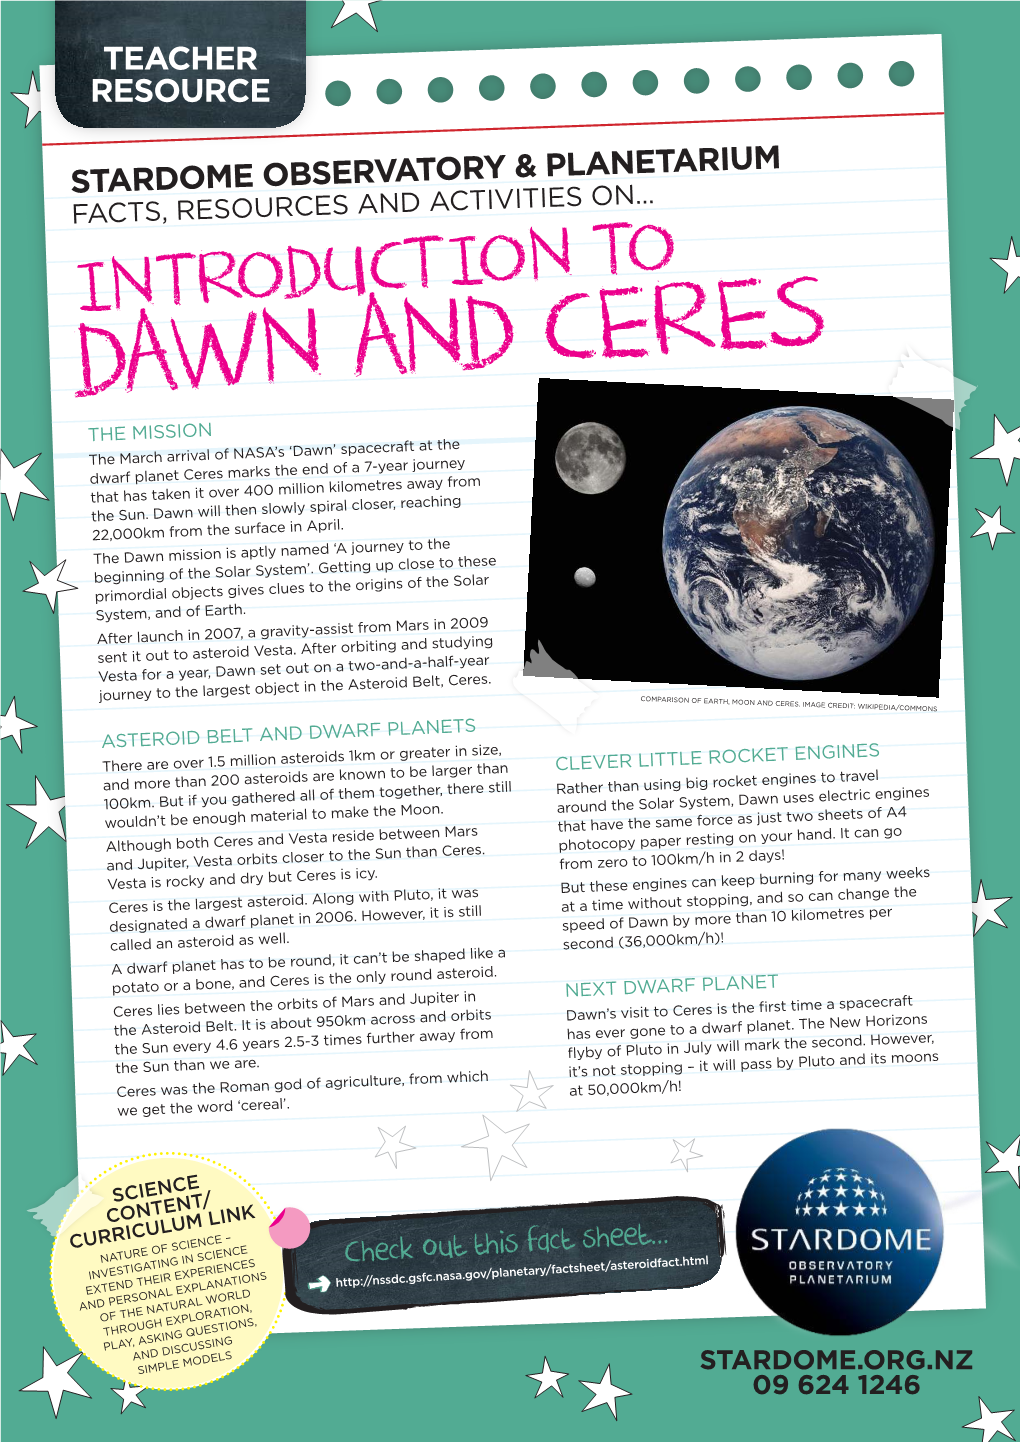 Introduction to Dawn and Ceres